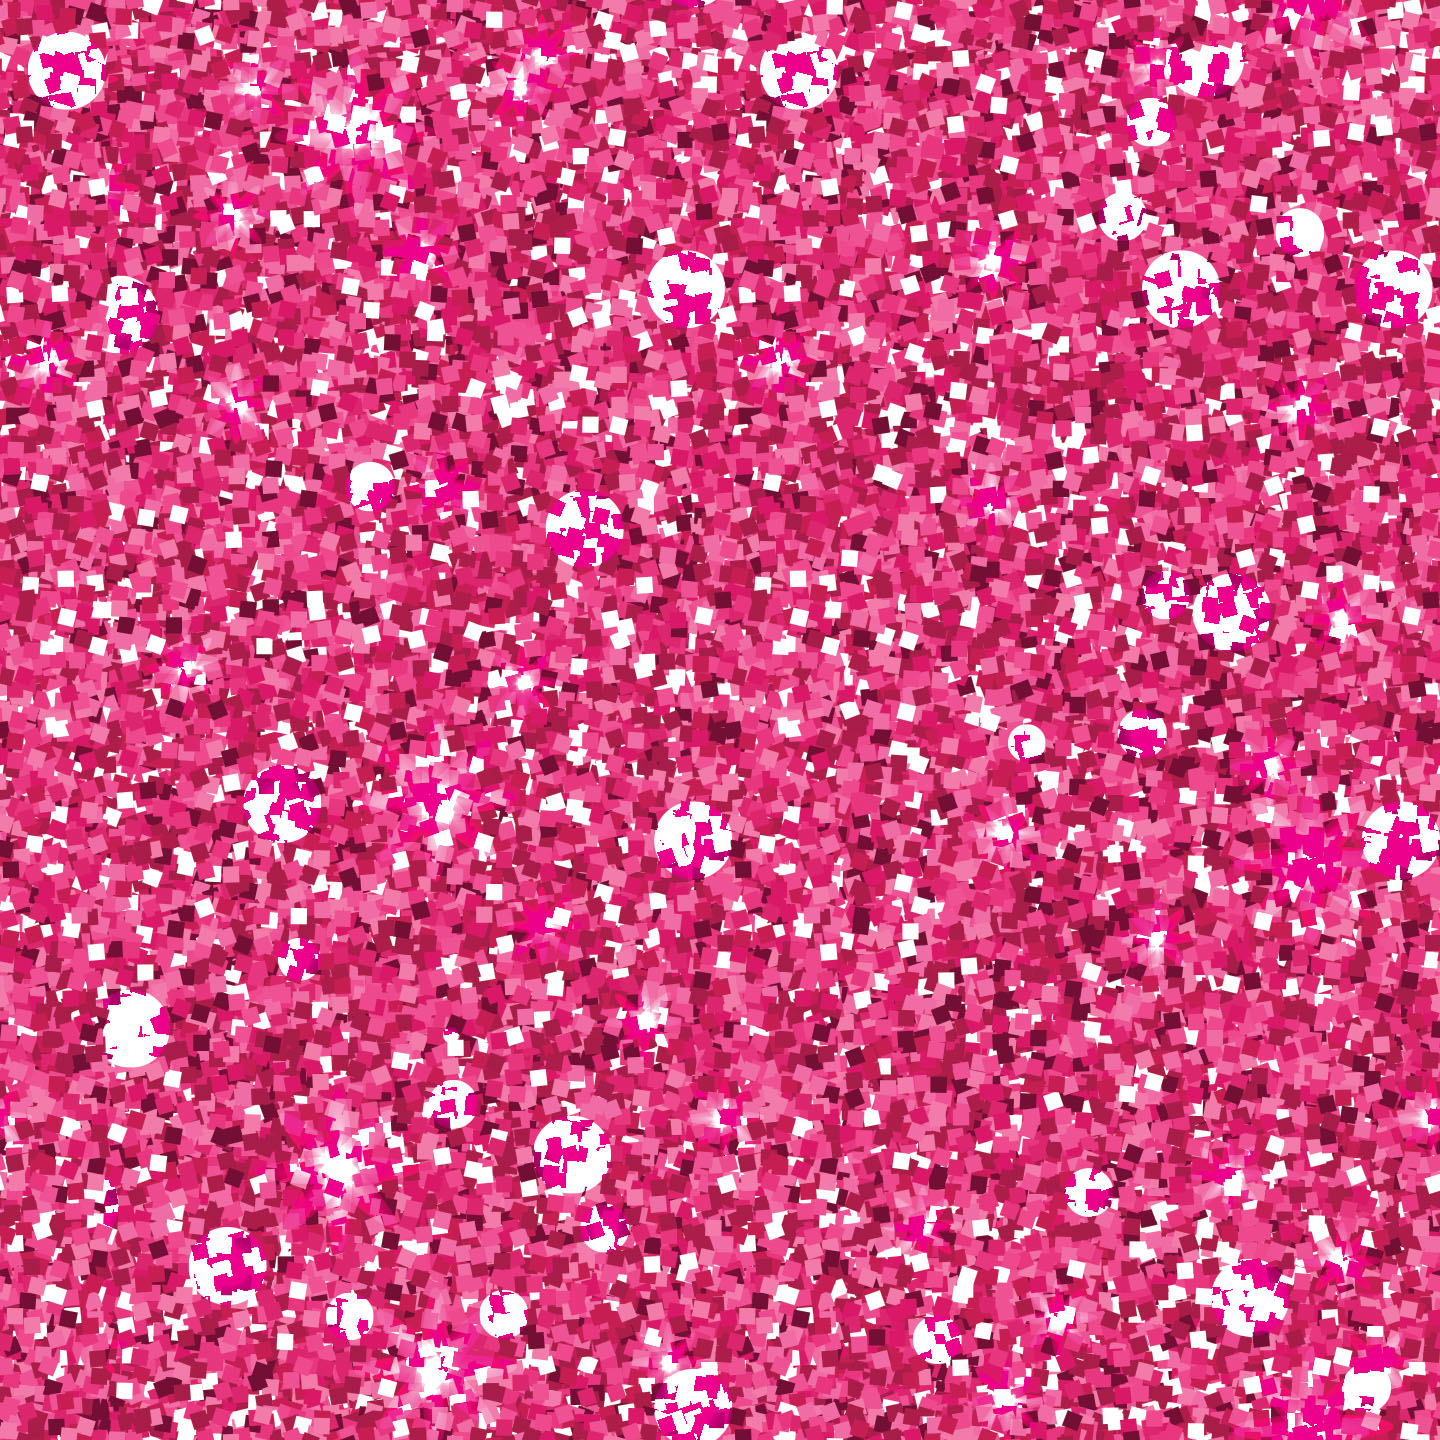 Doll House Glitter Pattern Wallpaper - Peel and Stick or Non-Pasted